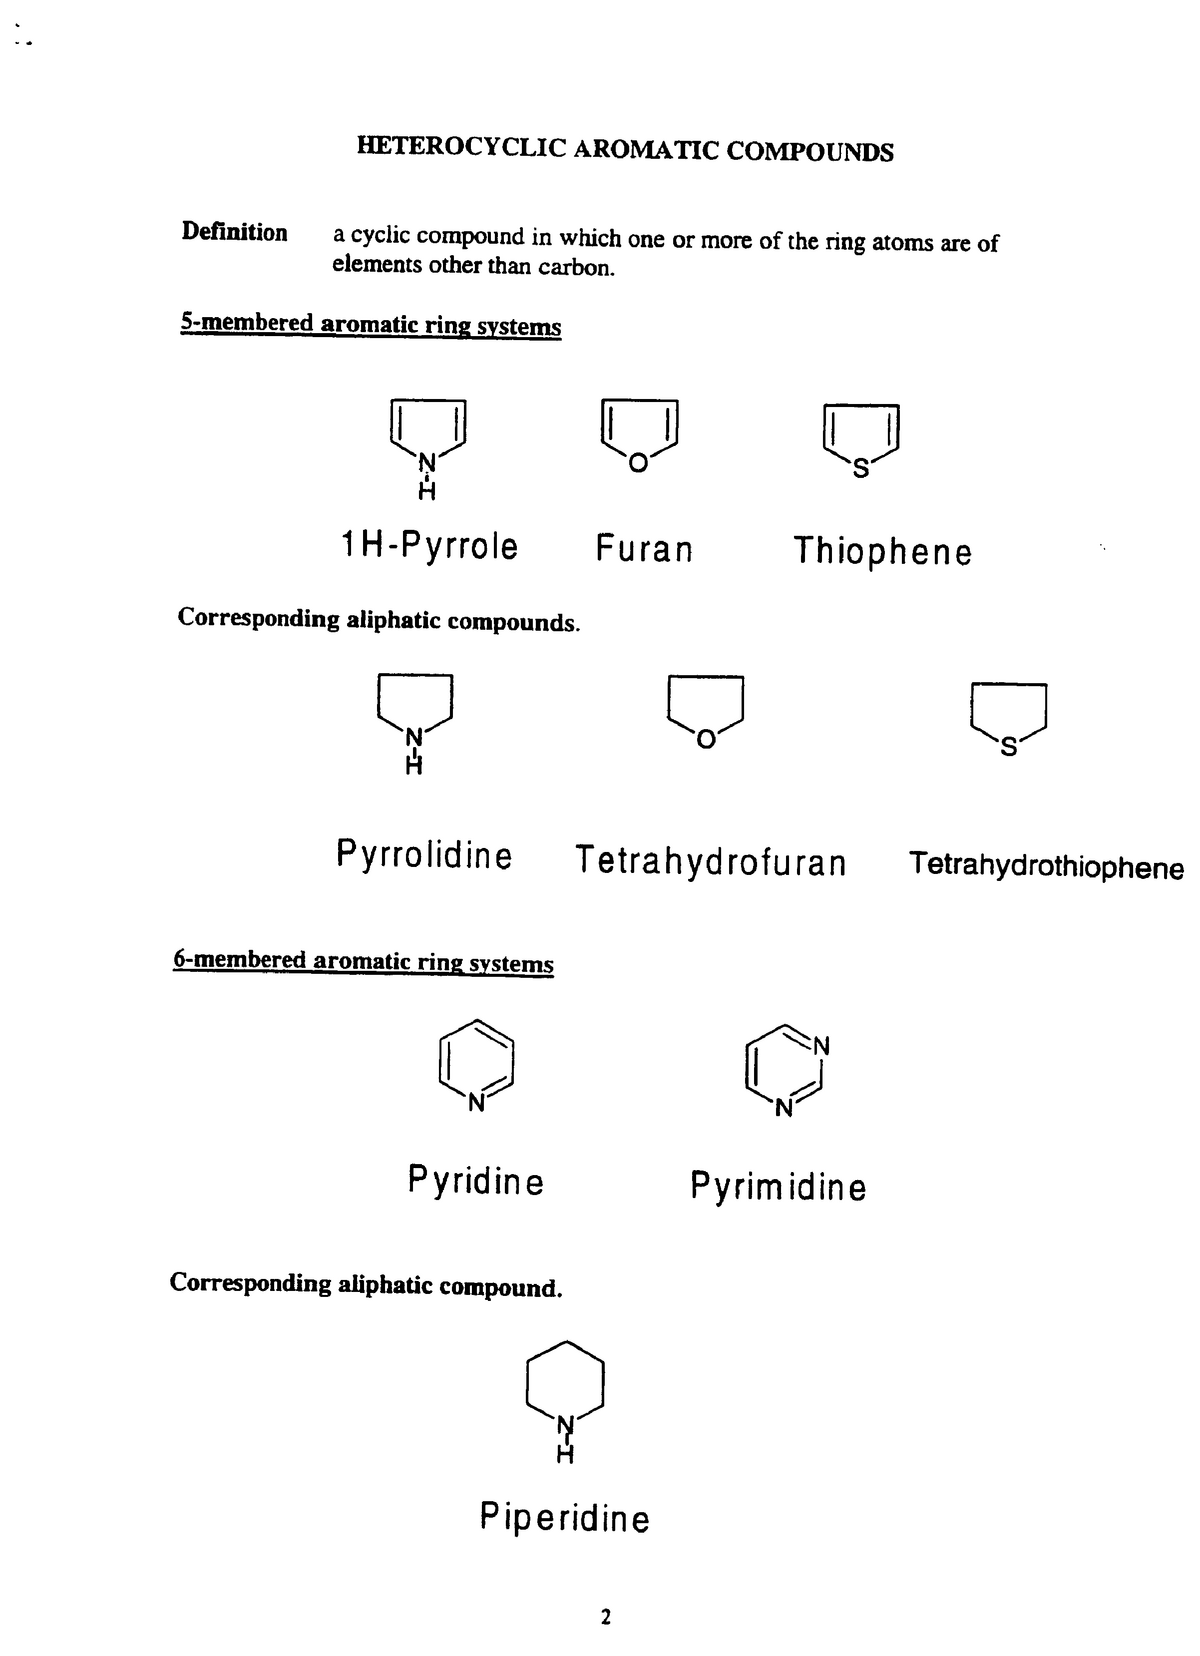 synthesis of heterocyclic compounds thesis